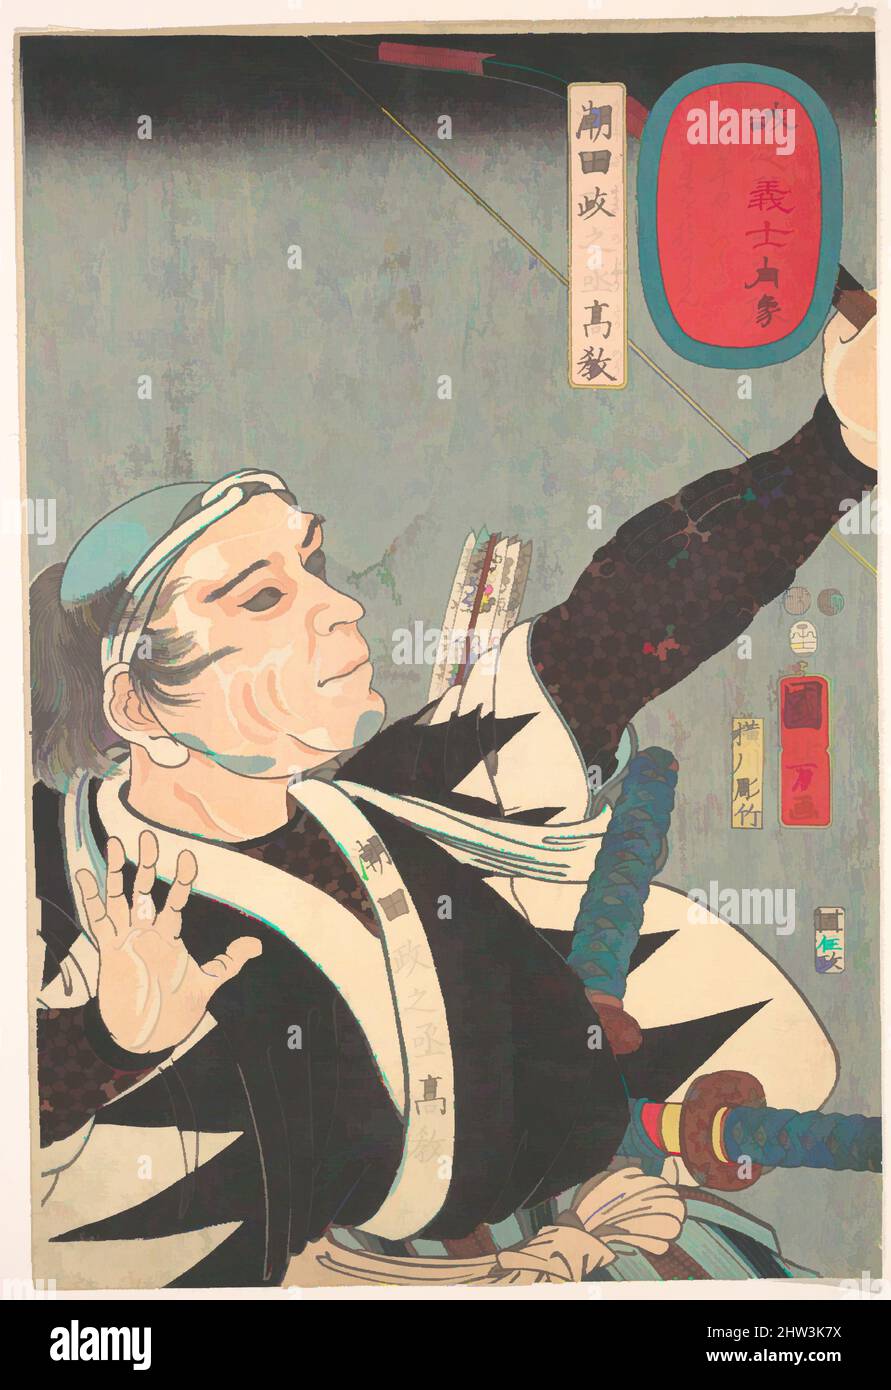 Art inspired by Portrait of Ushioda Masanojo Takano, Edo period (1615–1868), 1852, Japan, Polychrome woodblock print; ink and color on paper, H. 14 5/8 in. (37.1 cm); W. 9 7/8 in. (25.1 cm), Prints, Utagawa Kuniyoshi (Japanese, 1797–1861, Classic works modernized by Artotop with a splash of modernity. Shapes, color and value, eye-catching visual impact on art. Emotions through freedom of artworks in a contemporary way. A timeless message pursuing a wildly creative new direction. Artists turning to the digital medium and creating the Artotop NFT Stock Photo